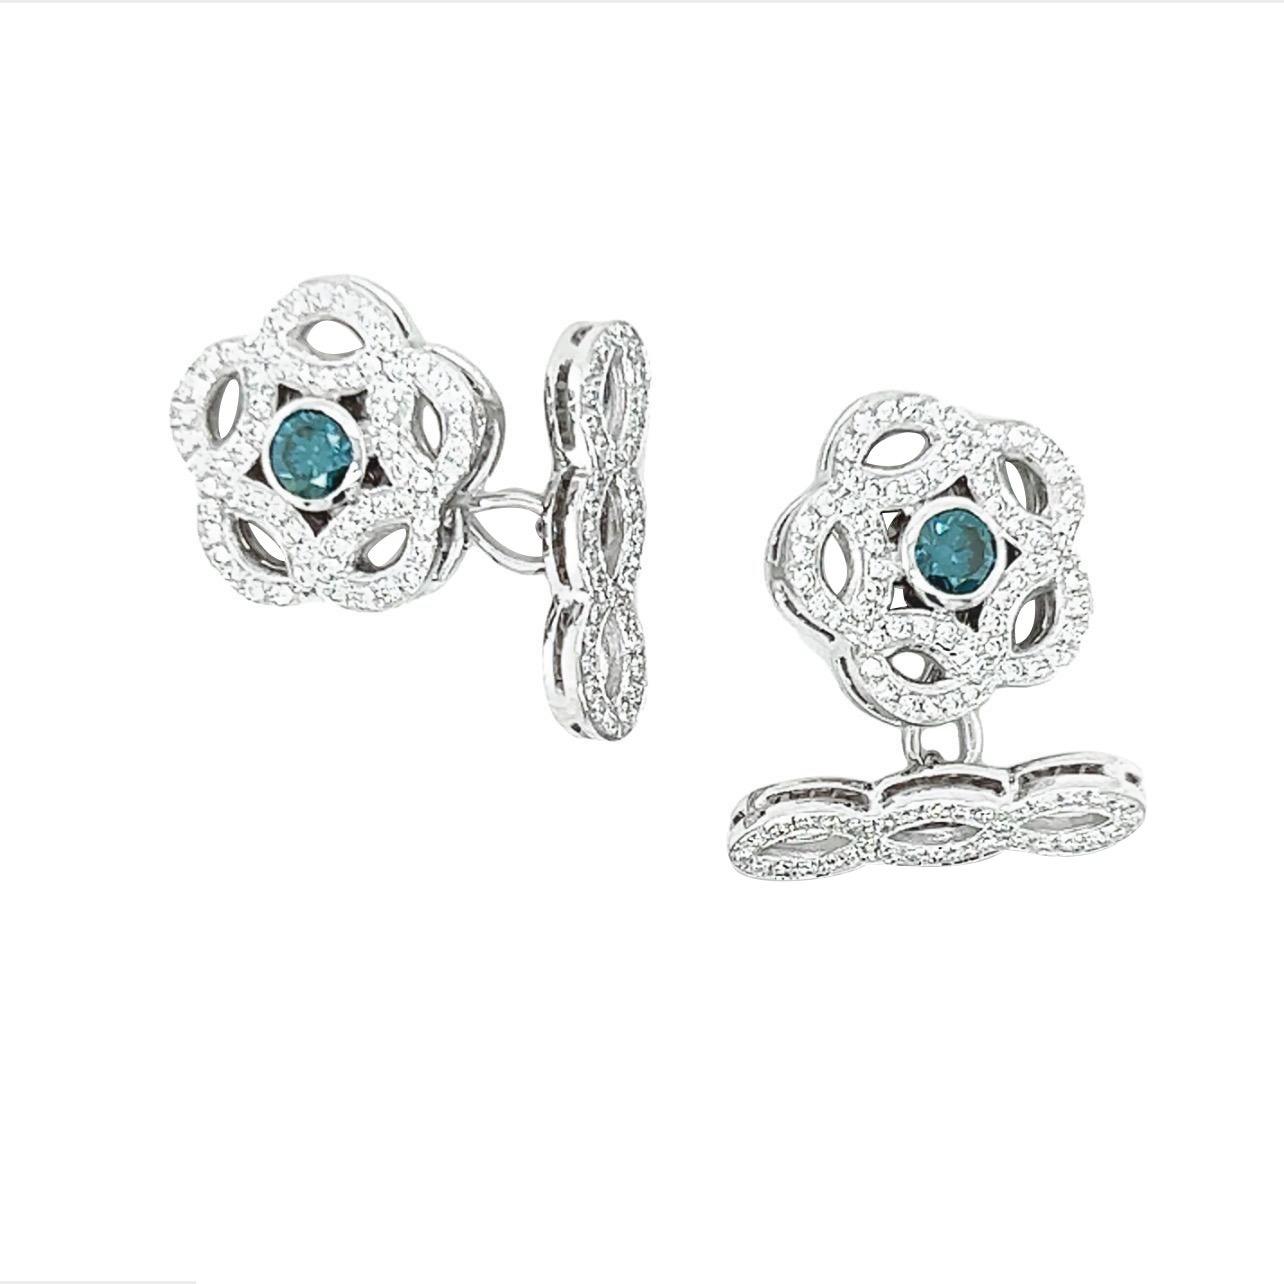 18k White Gold Cufflinks with Blue and White Diamonds